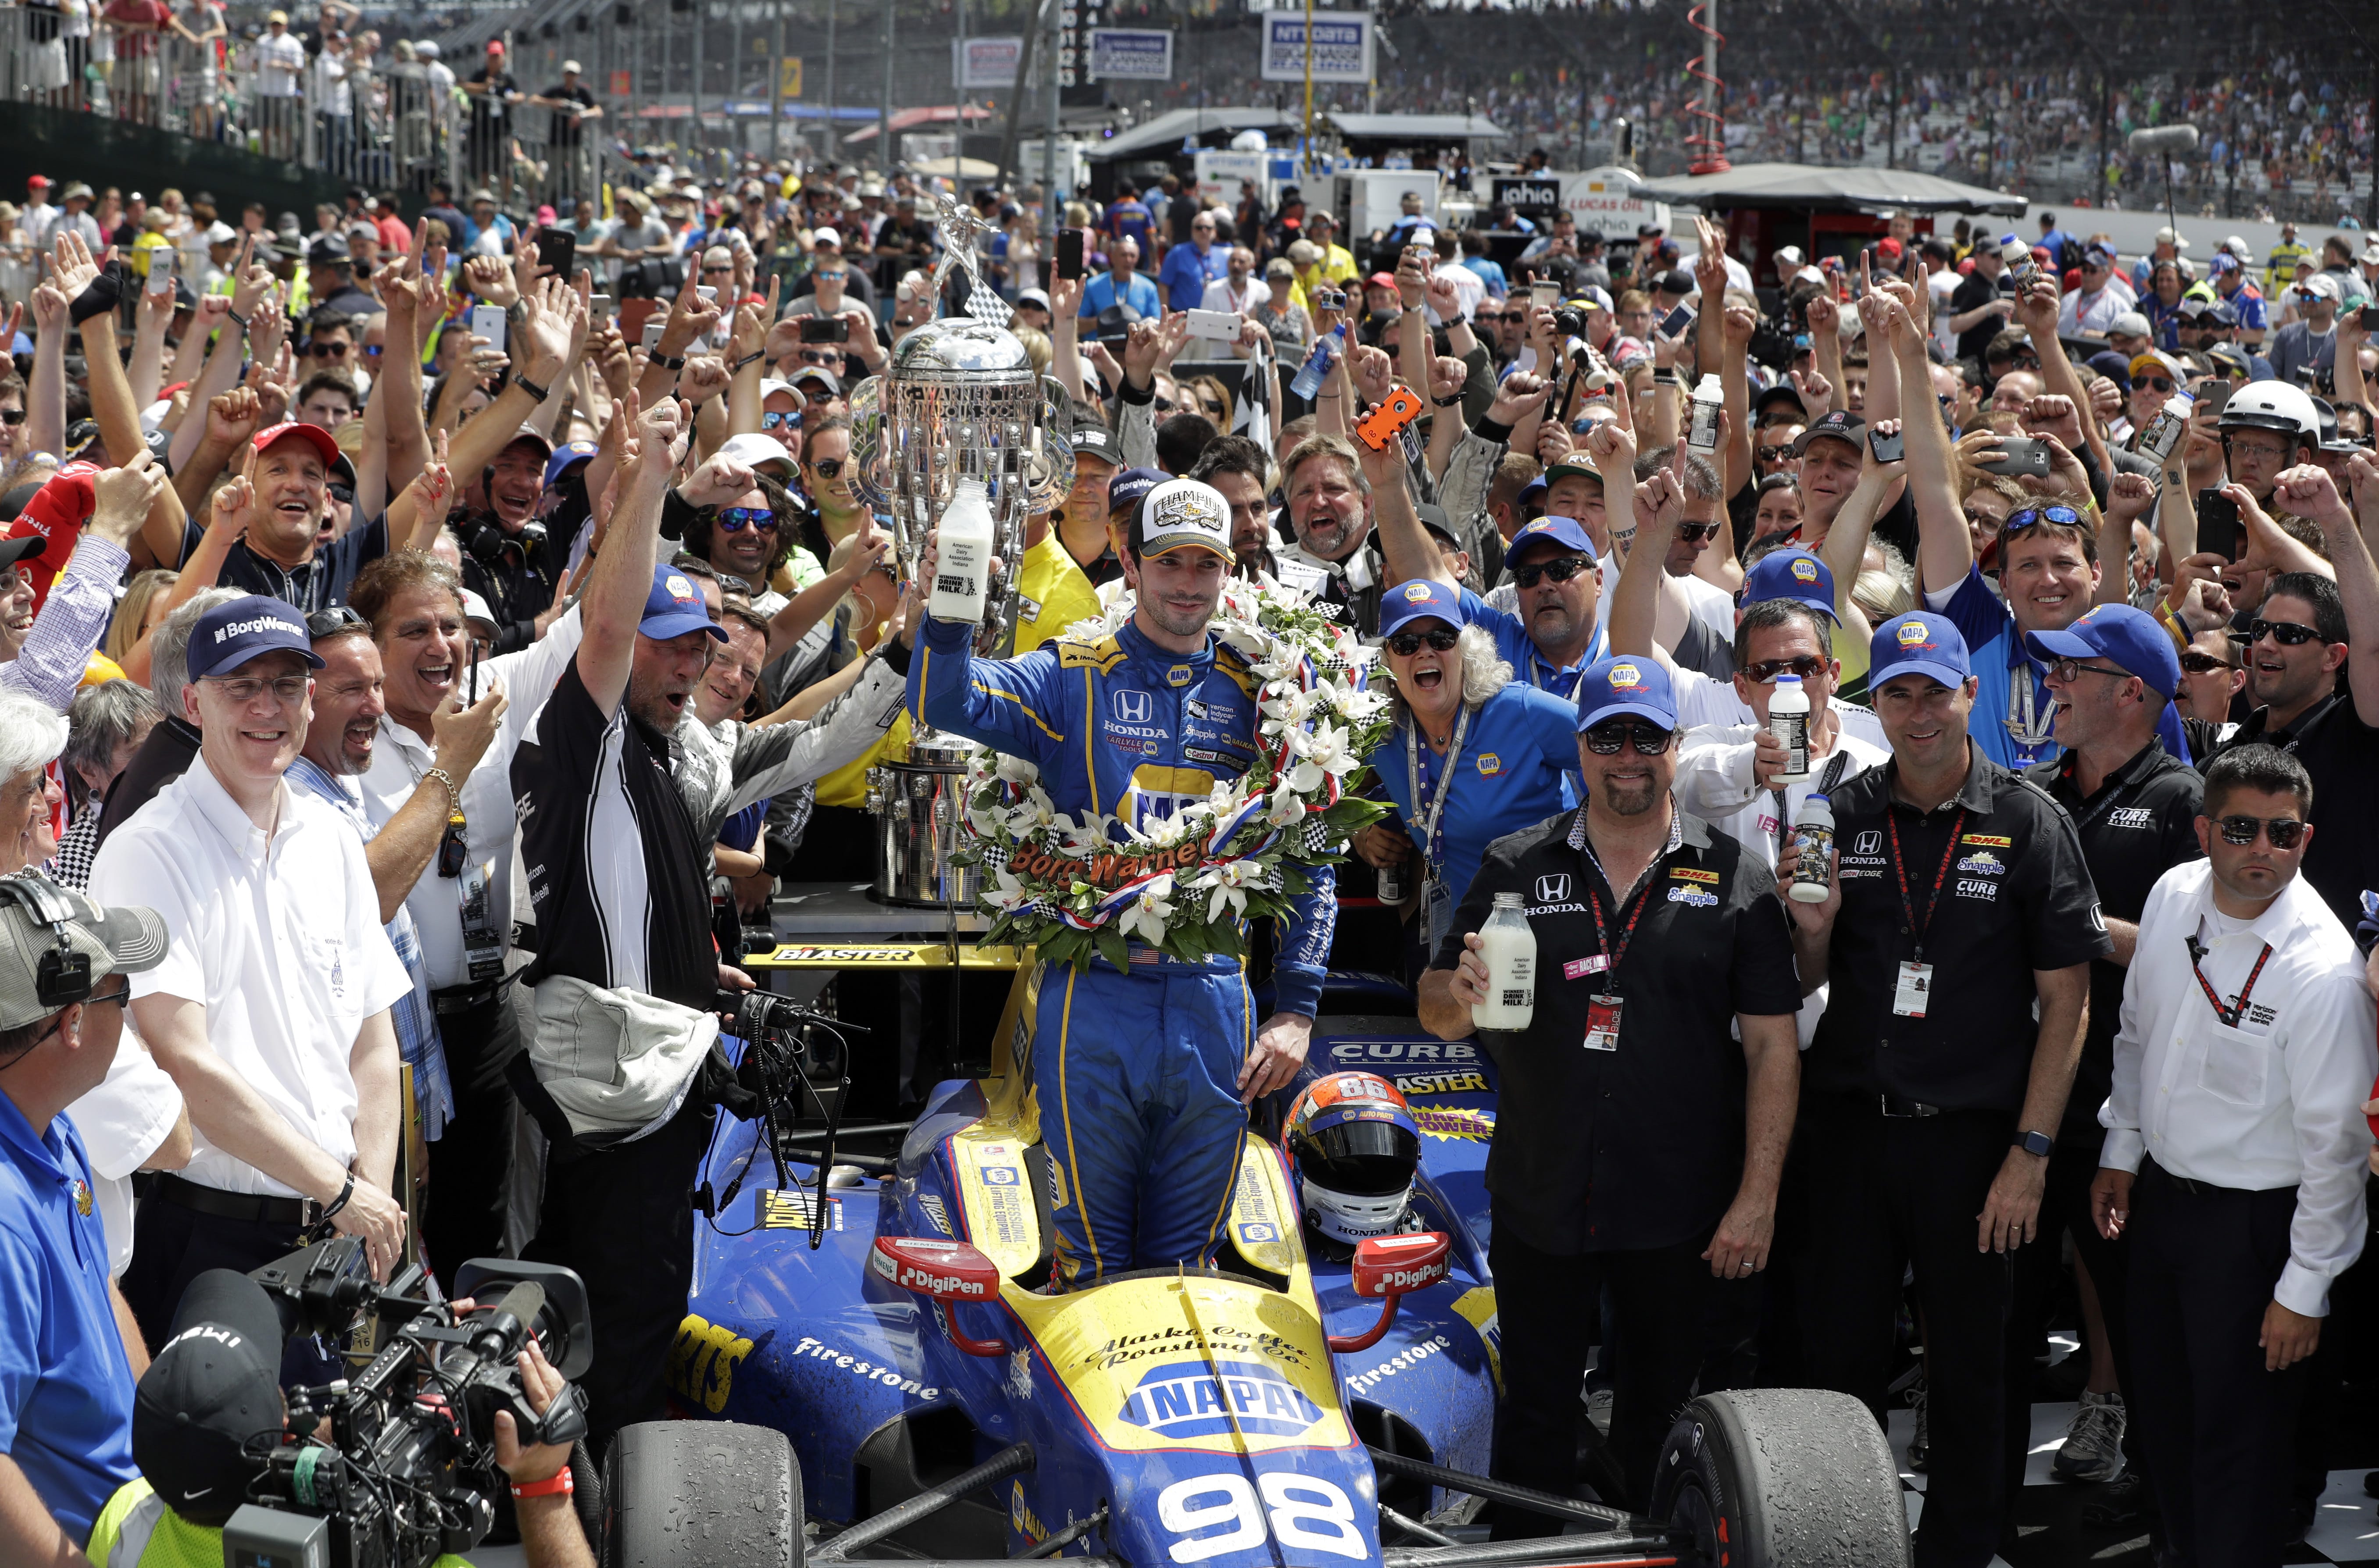 Alexander Rossi, center, celebrates after winning the 100th running of the Indianapolis 500 auto race at Indianapolis Motor Speedway in Indianapolis, Sunday, May 29, 2016.